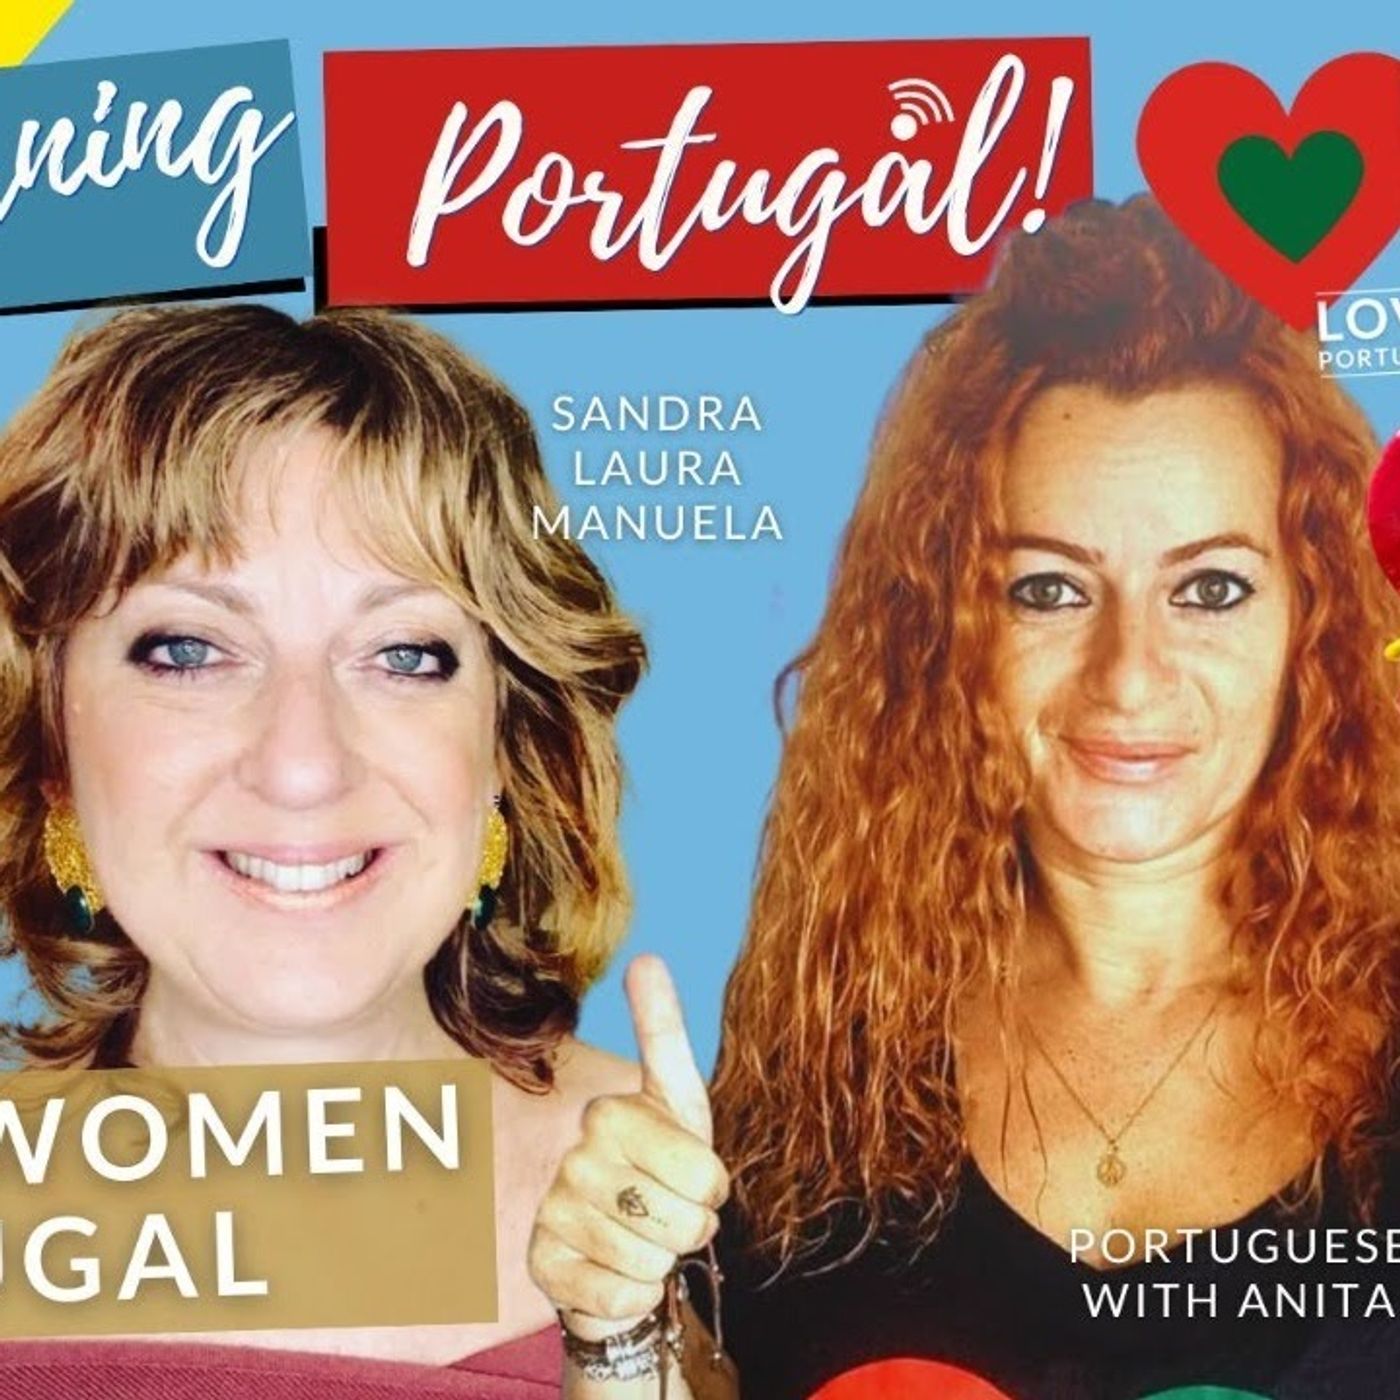 Powerful Women in Business, Transformation & Language on Good Morning Portugal!